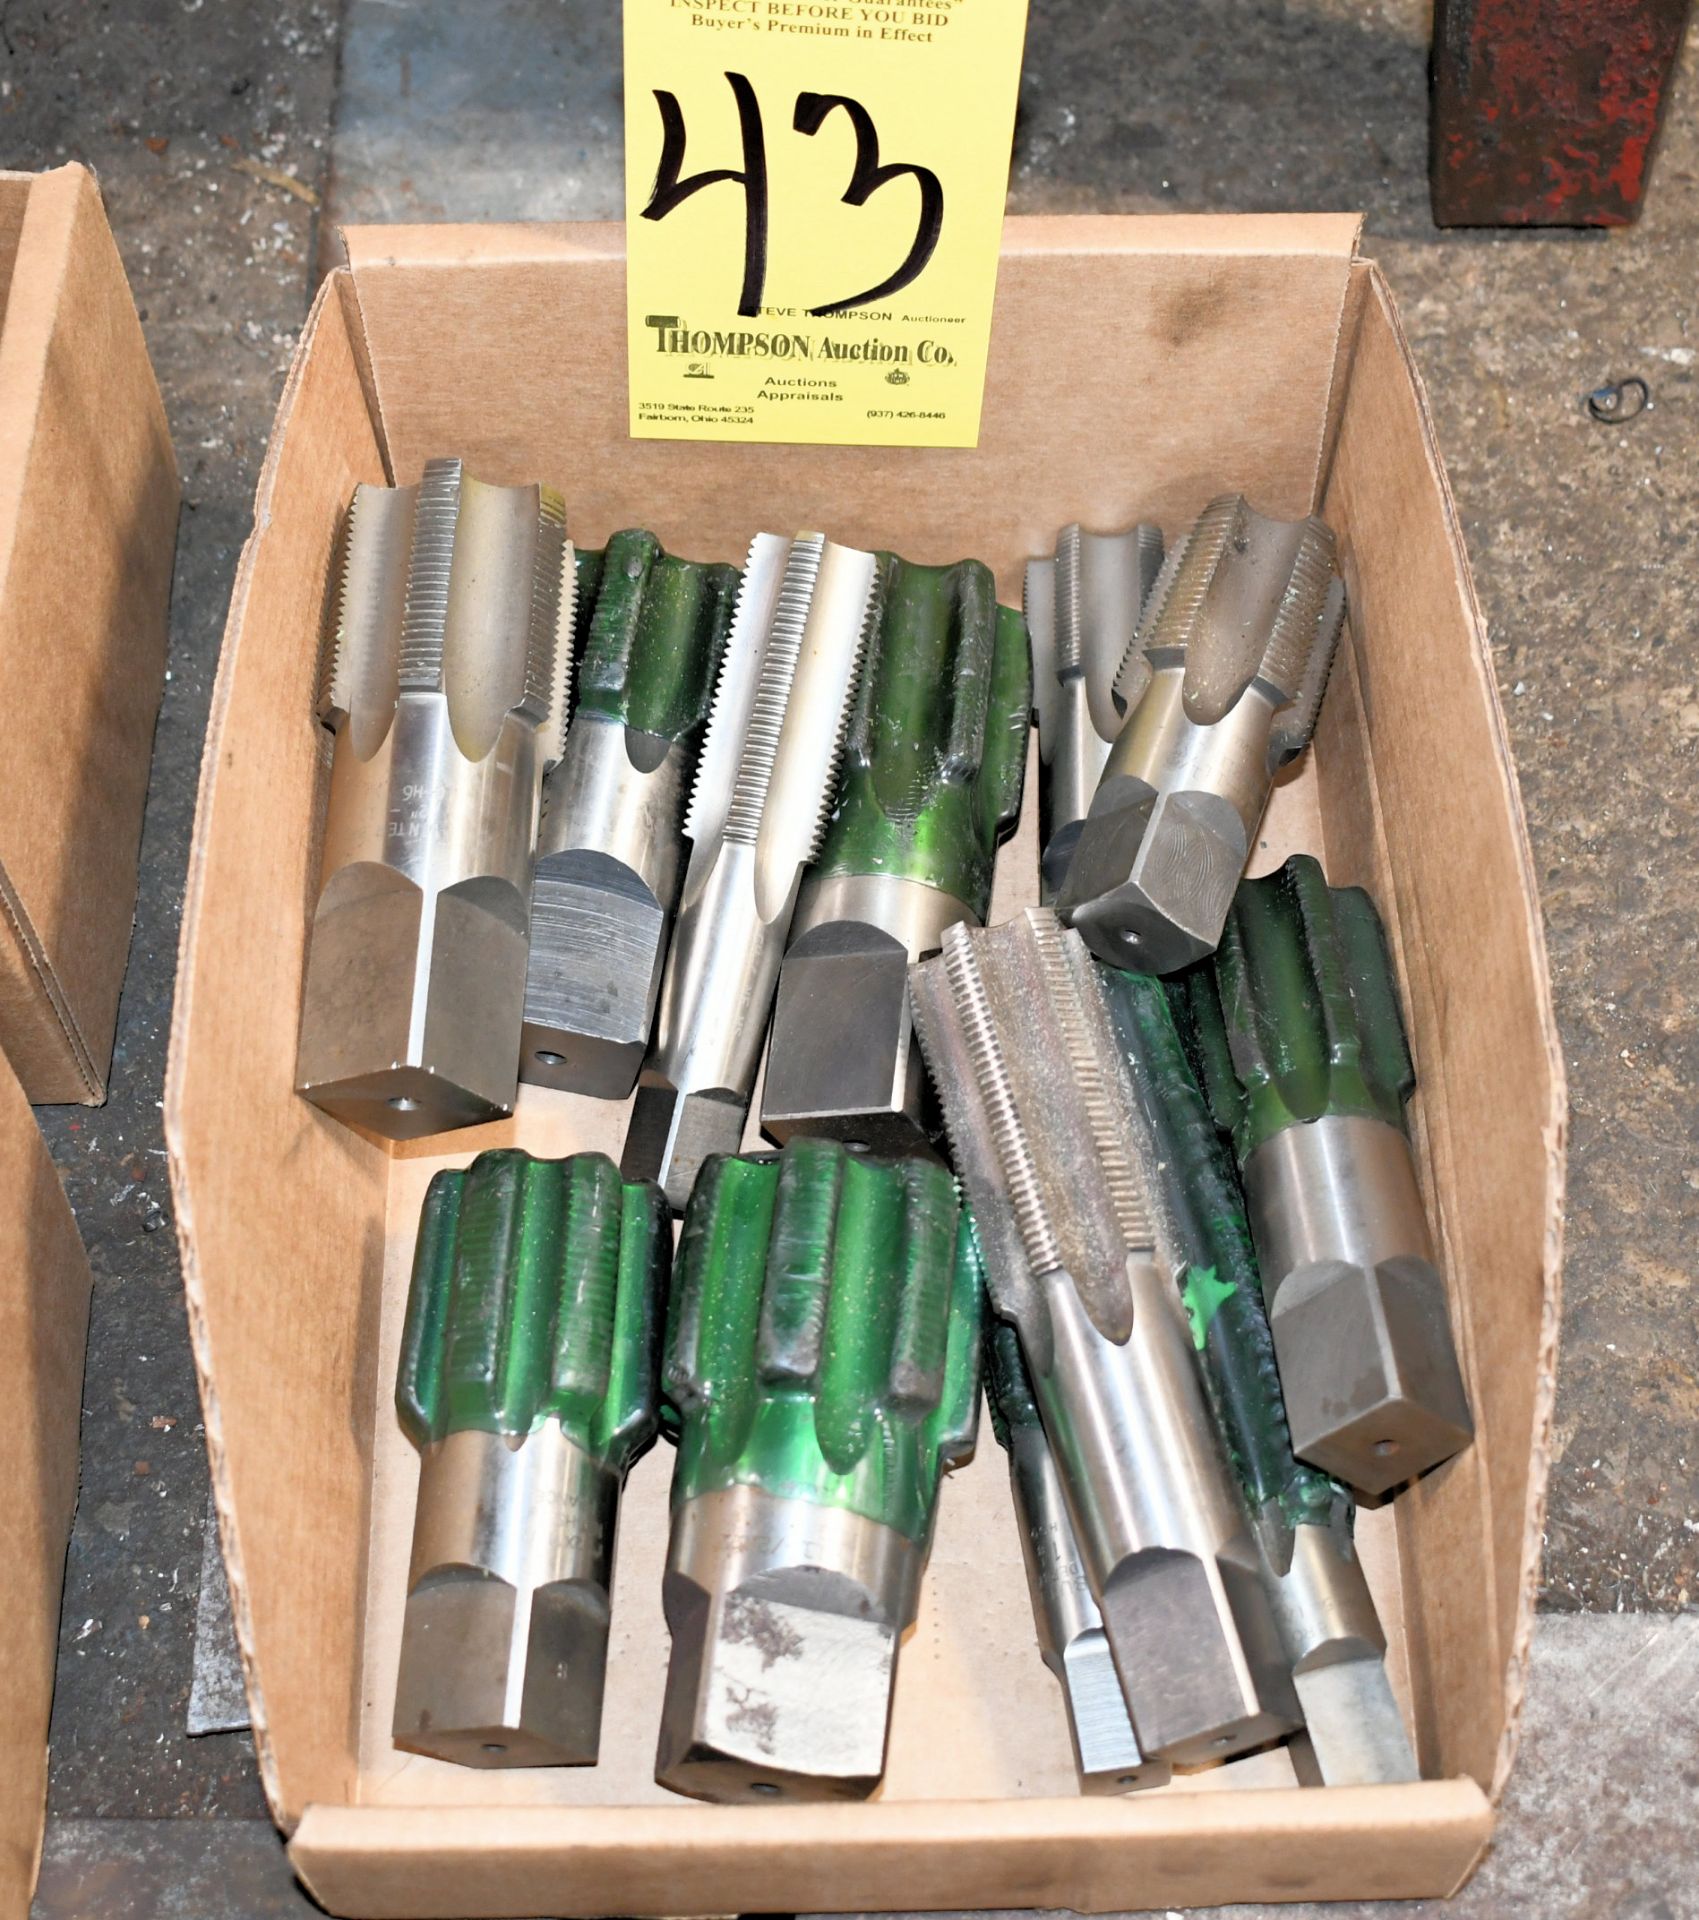 Lot-Large Industrial Taps in (1) Box